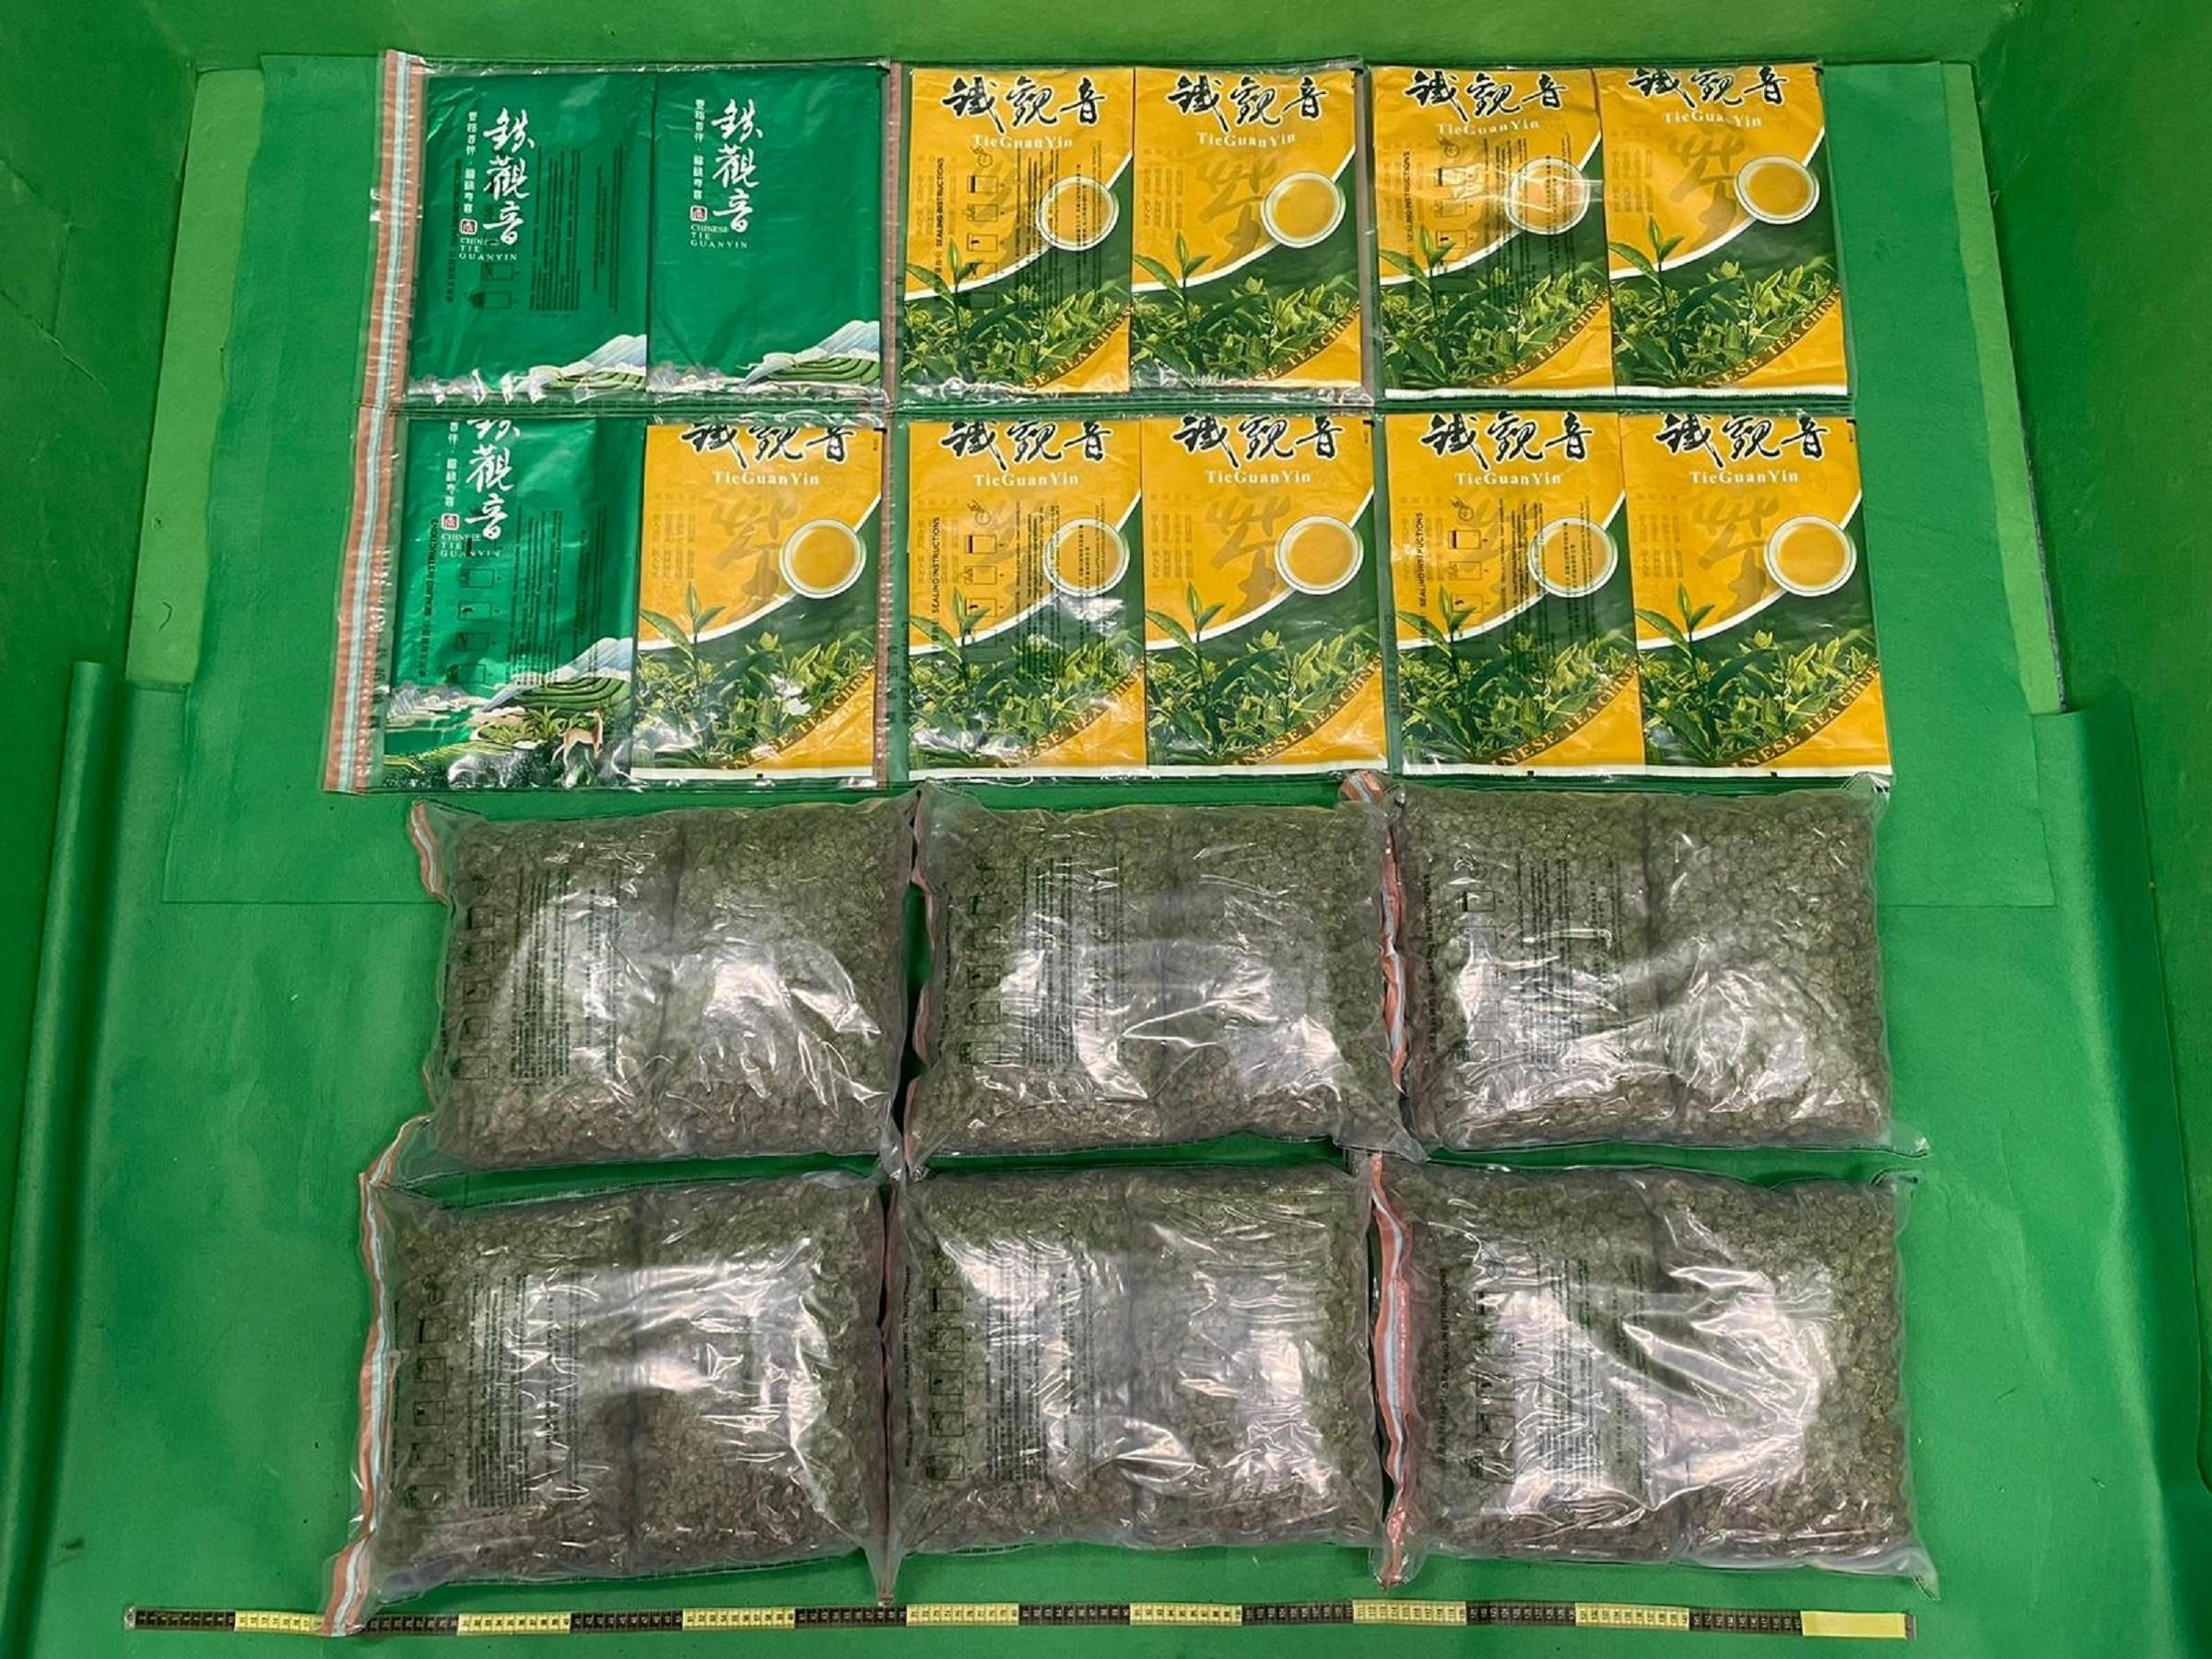 Hong Kong Customs detected five dangerous drugs cases, in which local freight consolidators were being exploited, at Hong Kong International Airport between end-July and mid-October this year and seized about 29 kilograms of suspected methamphetamine and about 12kg of suspected cannabis buds with a total estimated market value of about $20 million. Photo shows the suspected cannabis buds seized in the fourth and fifth cases and the tea leaf packaging bags used to conceal the drugs.